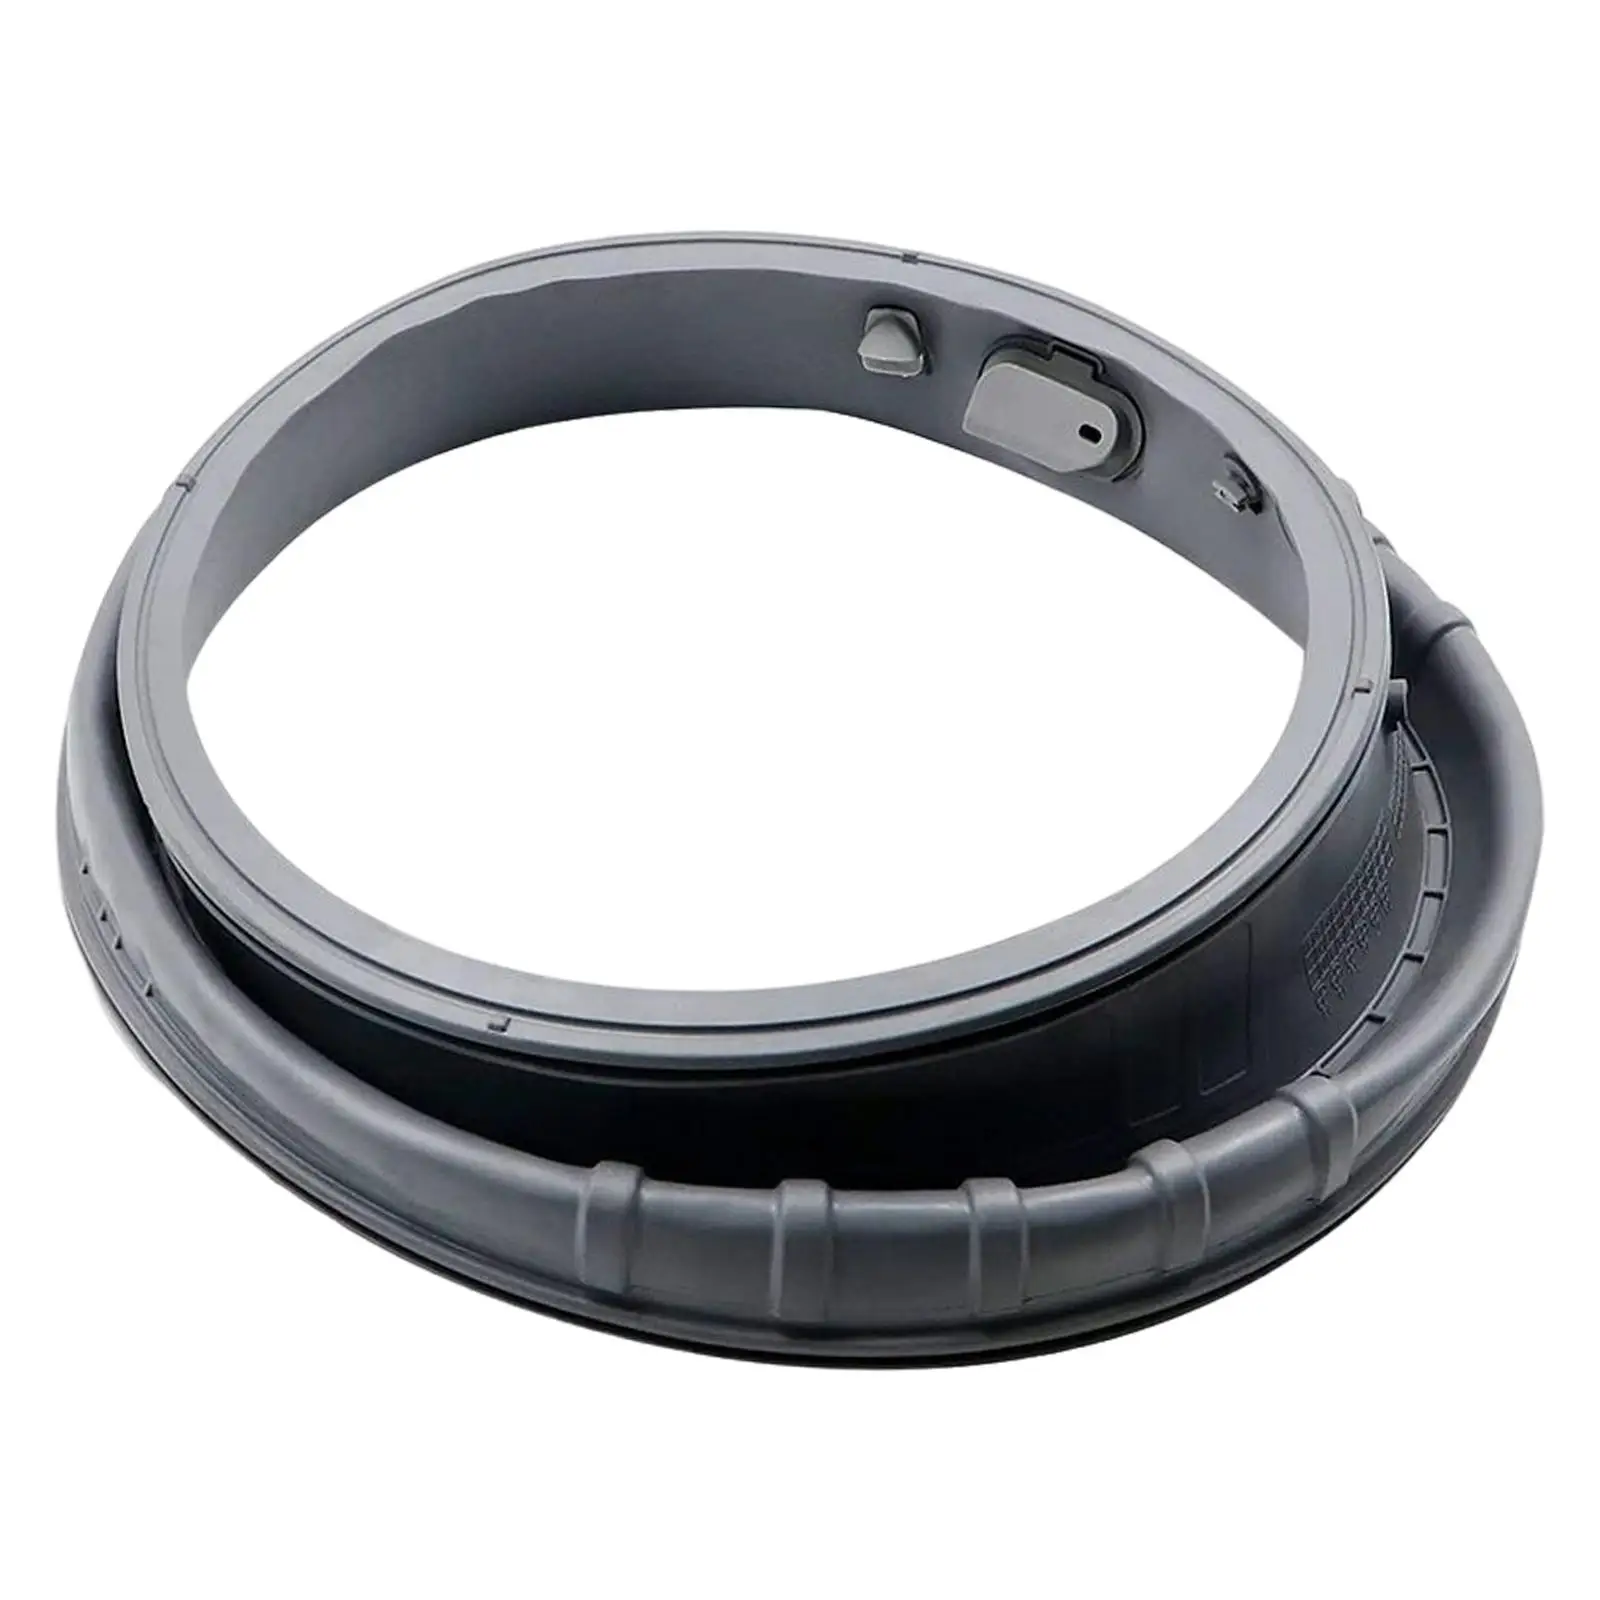 Round Door Boot Gasket Gum Material for Samsung Washers DC97-18094B AP5917067 Washer Repair Gray PS9606239